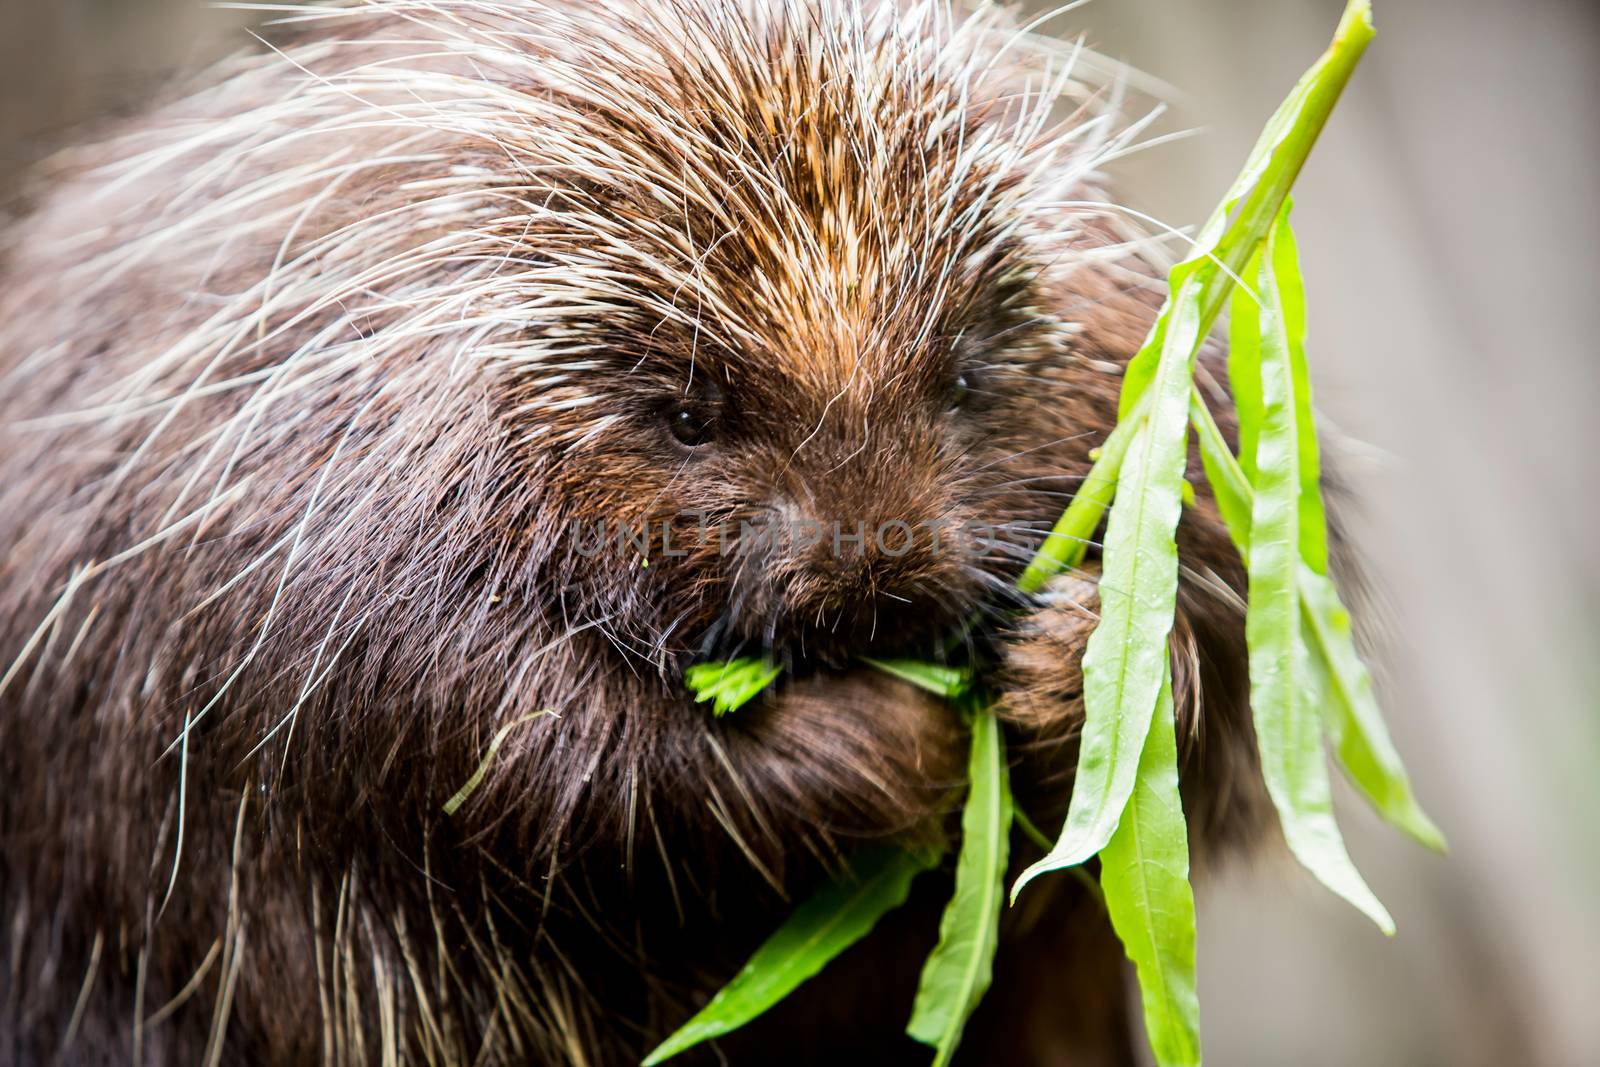 Porcupine Munching on Plants by Creatista